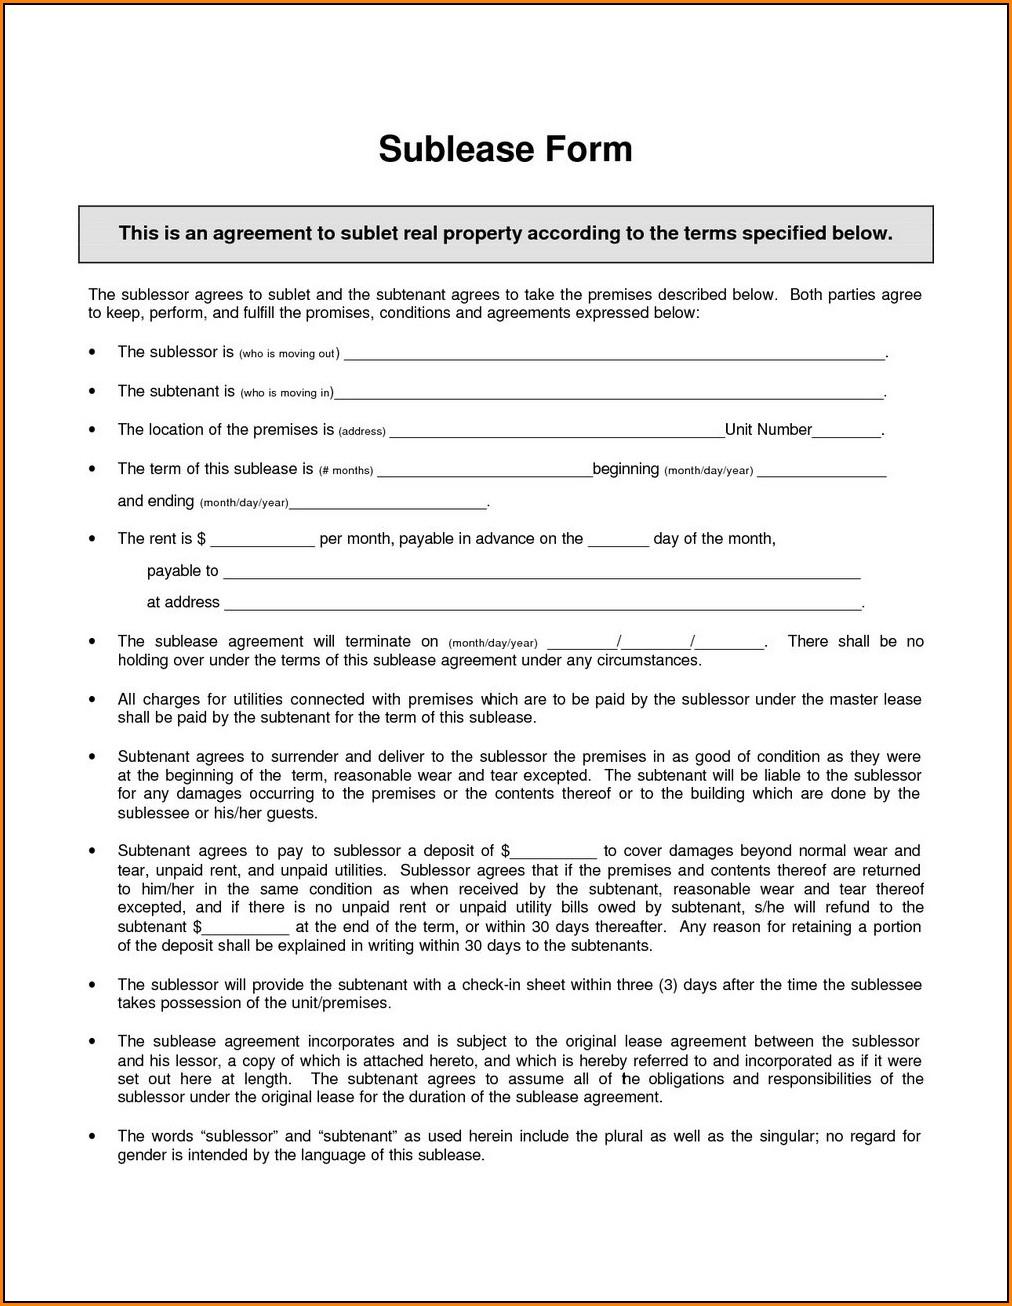 Sublease Agreement Format India